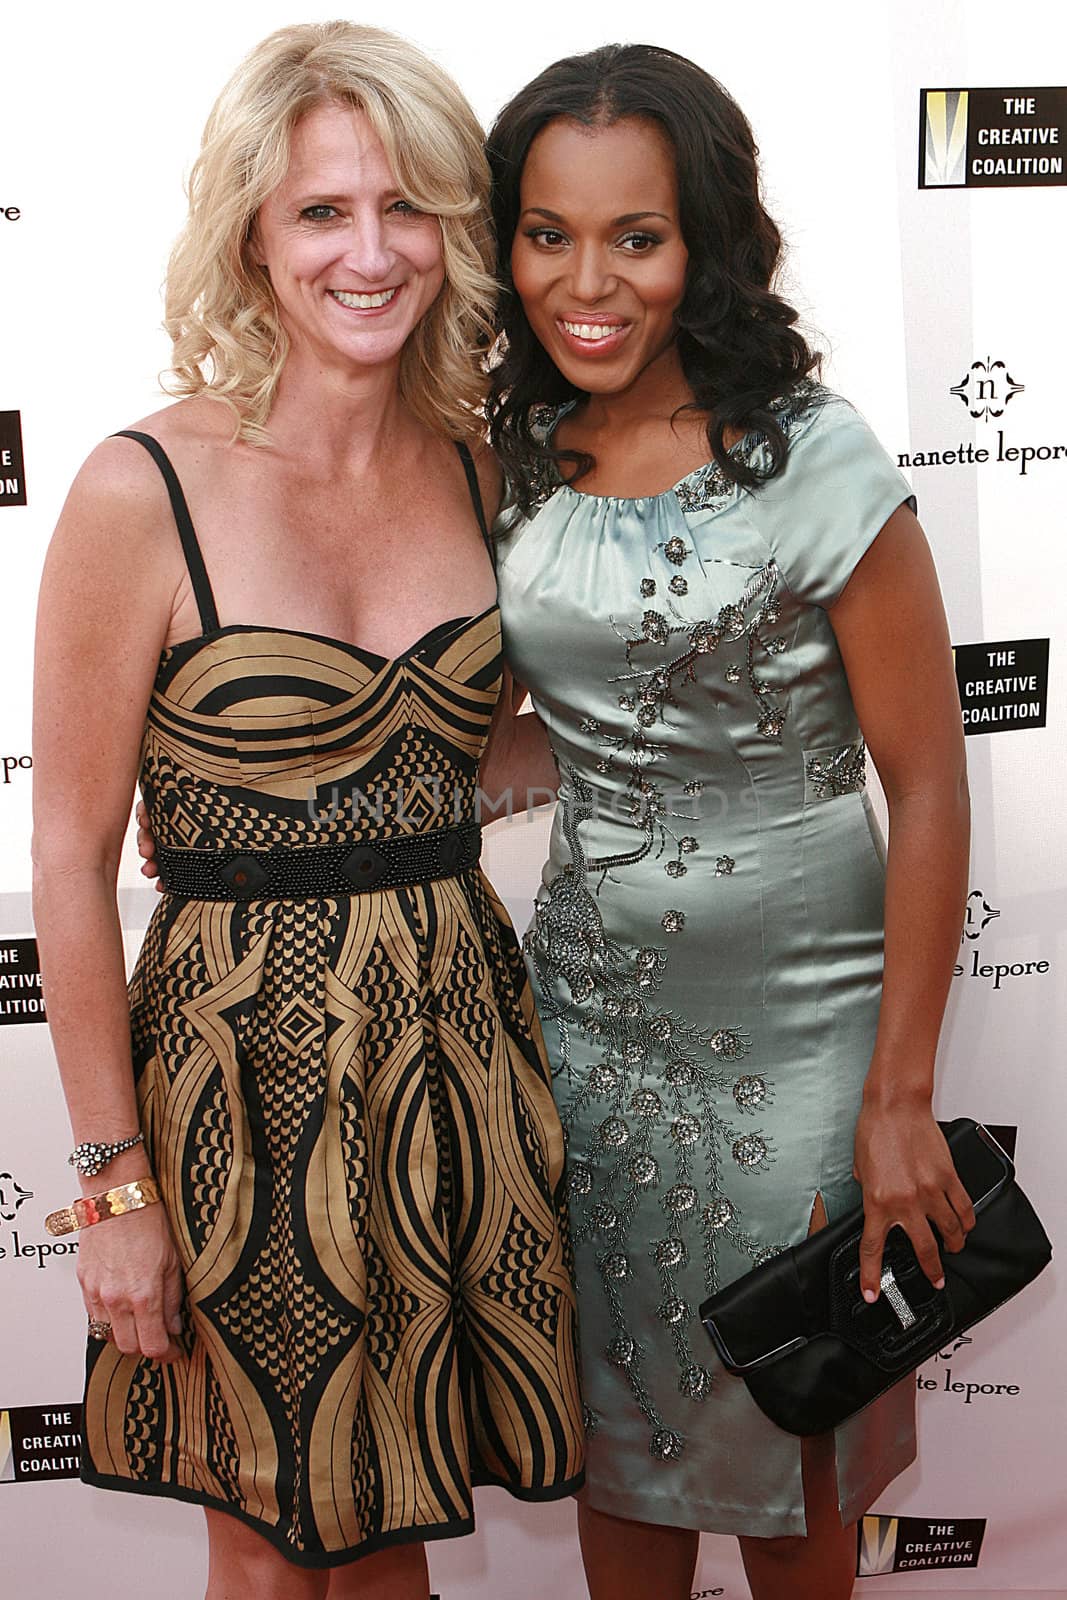 Nanette Lepore and Kerry Washington attends  "Fashion Votes: A Celebration of Fashion and Politics" Hosted by Nanette Lepore and Kerry Washington, on June 16, 2008, at the Nanette Lepore Store, Beverly Hills, CA, USA. Photo Credit Brian Lindensmith. Copyright All Access Photo Agency.